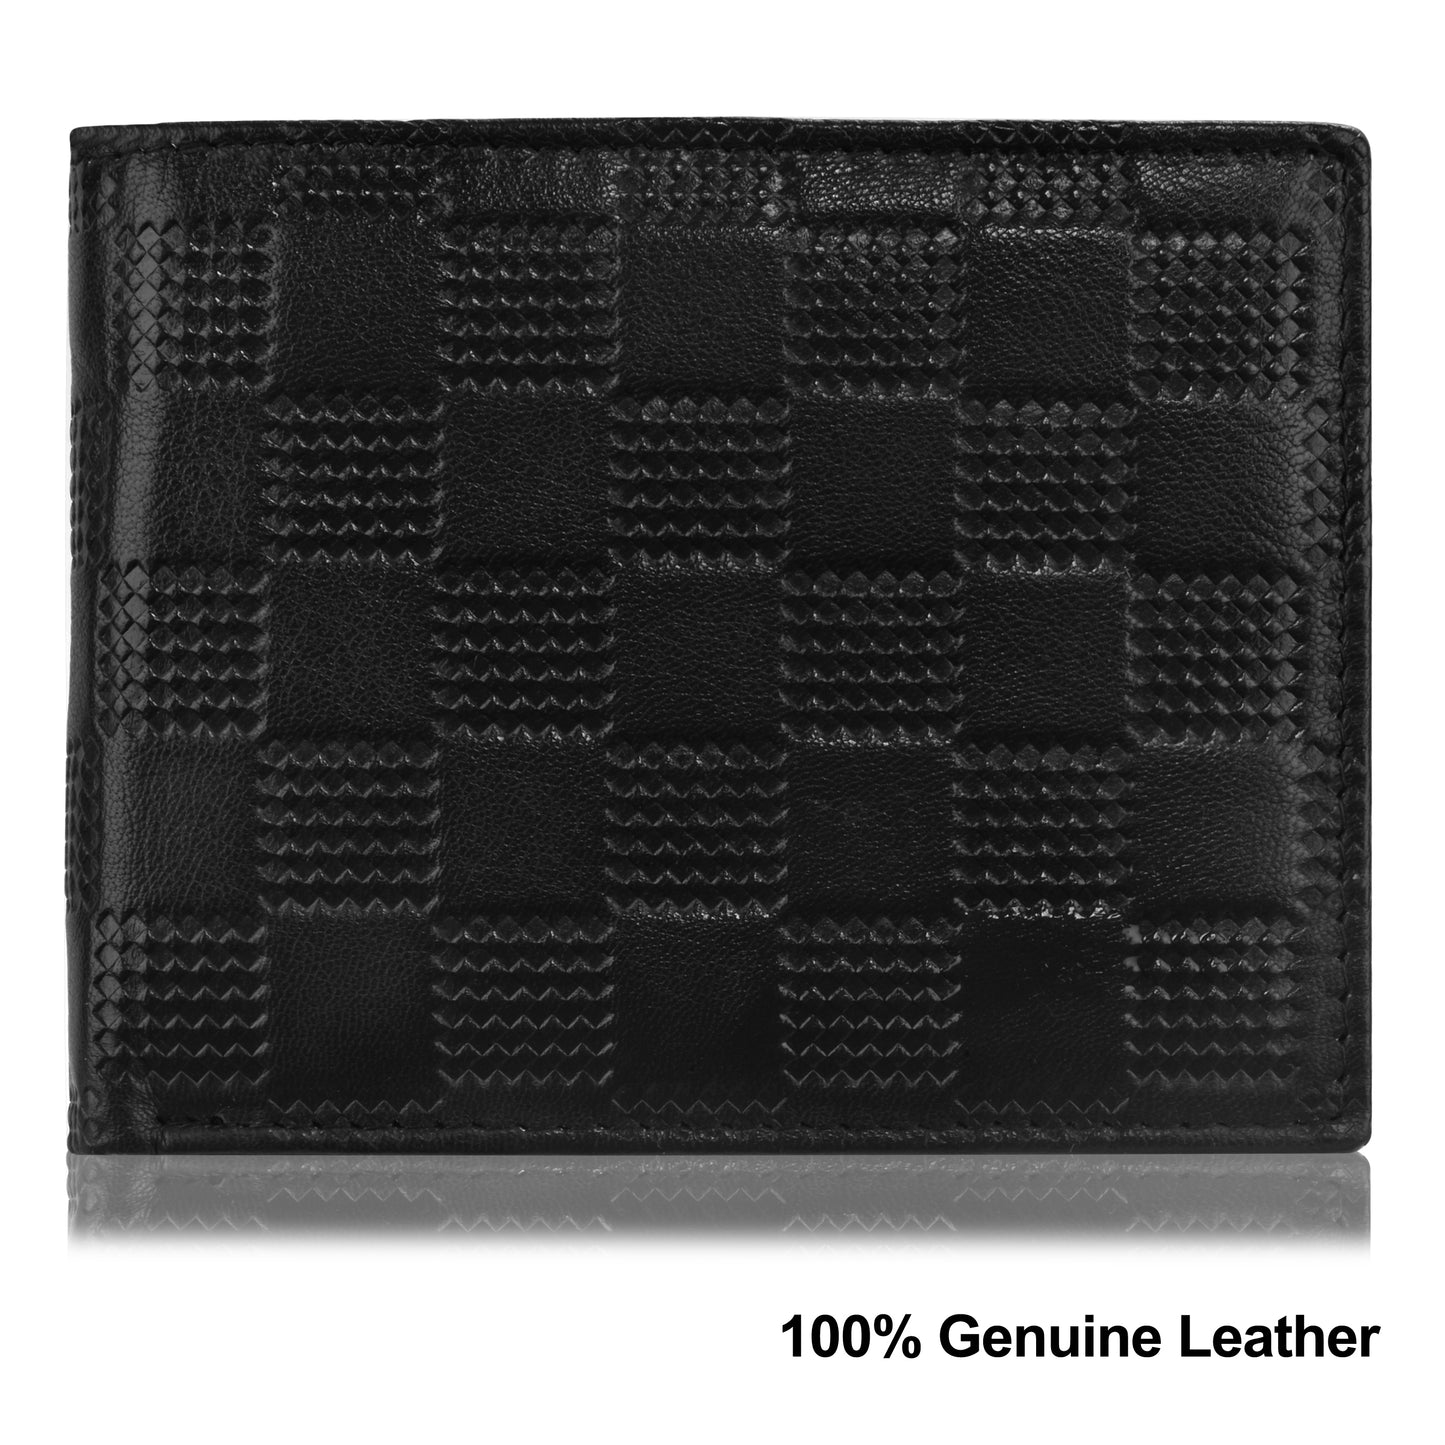 Lorenz Bi-Fold Embossed Box Pattern Black RFID Blocking Leather Wallet for Men with Zipper Coin Pocket & ID Card Feature